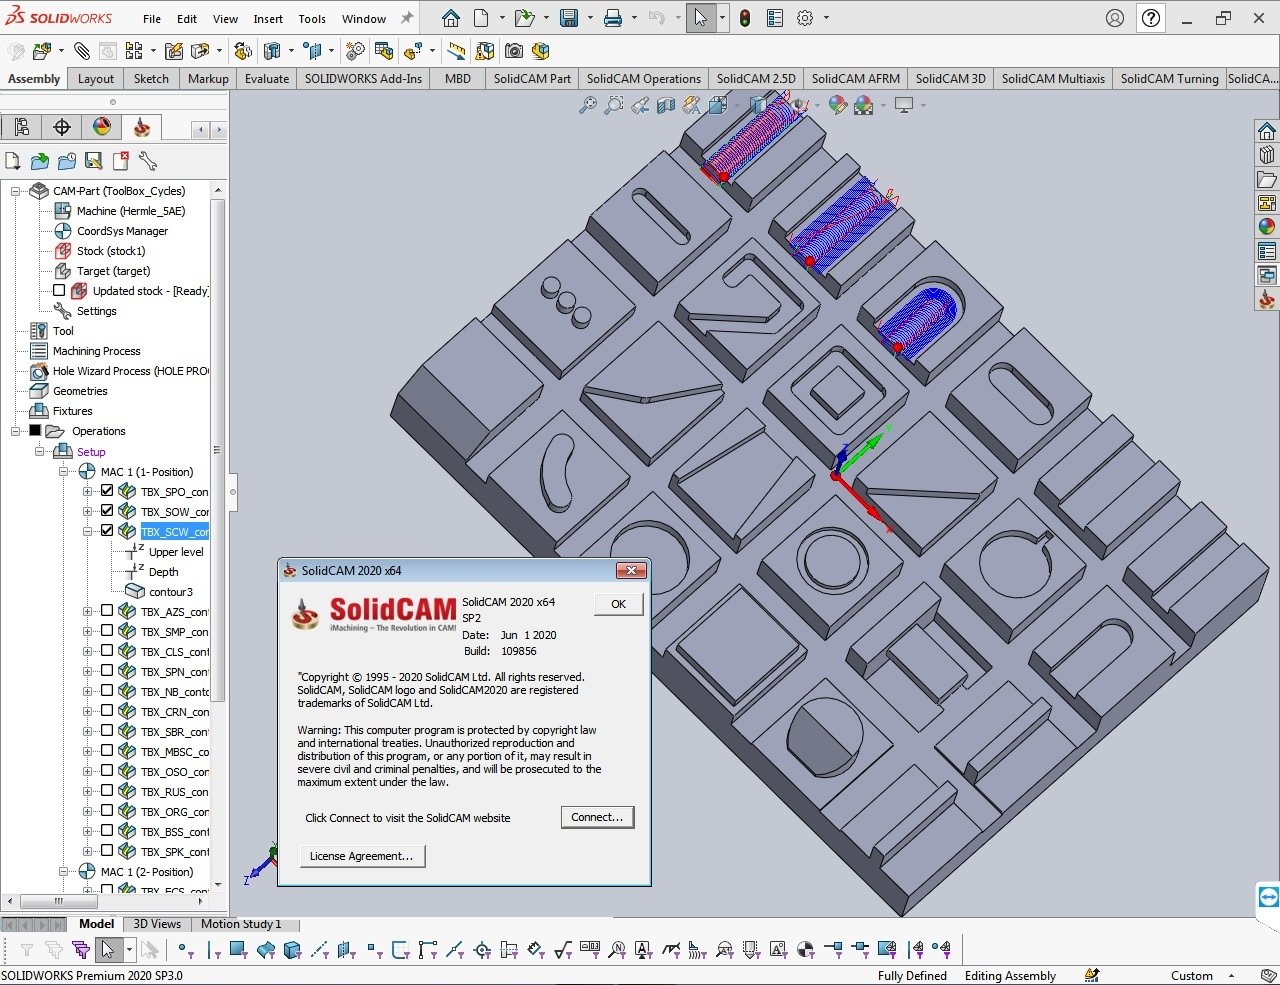 download the last version for ios SolidCAM for SolidWorks 2023 SP0